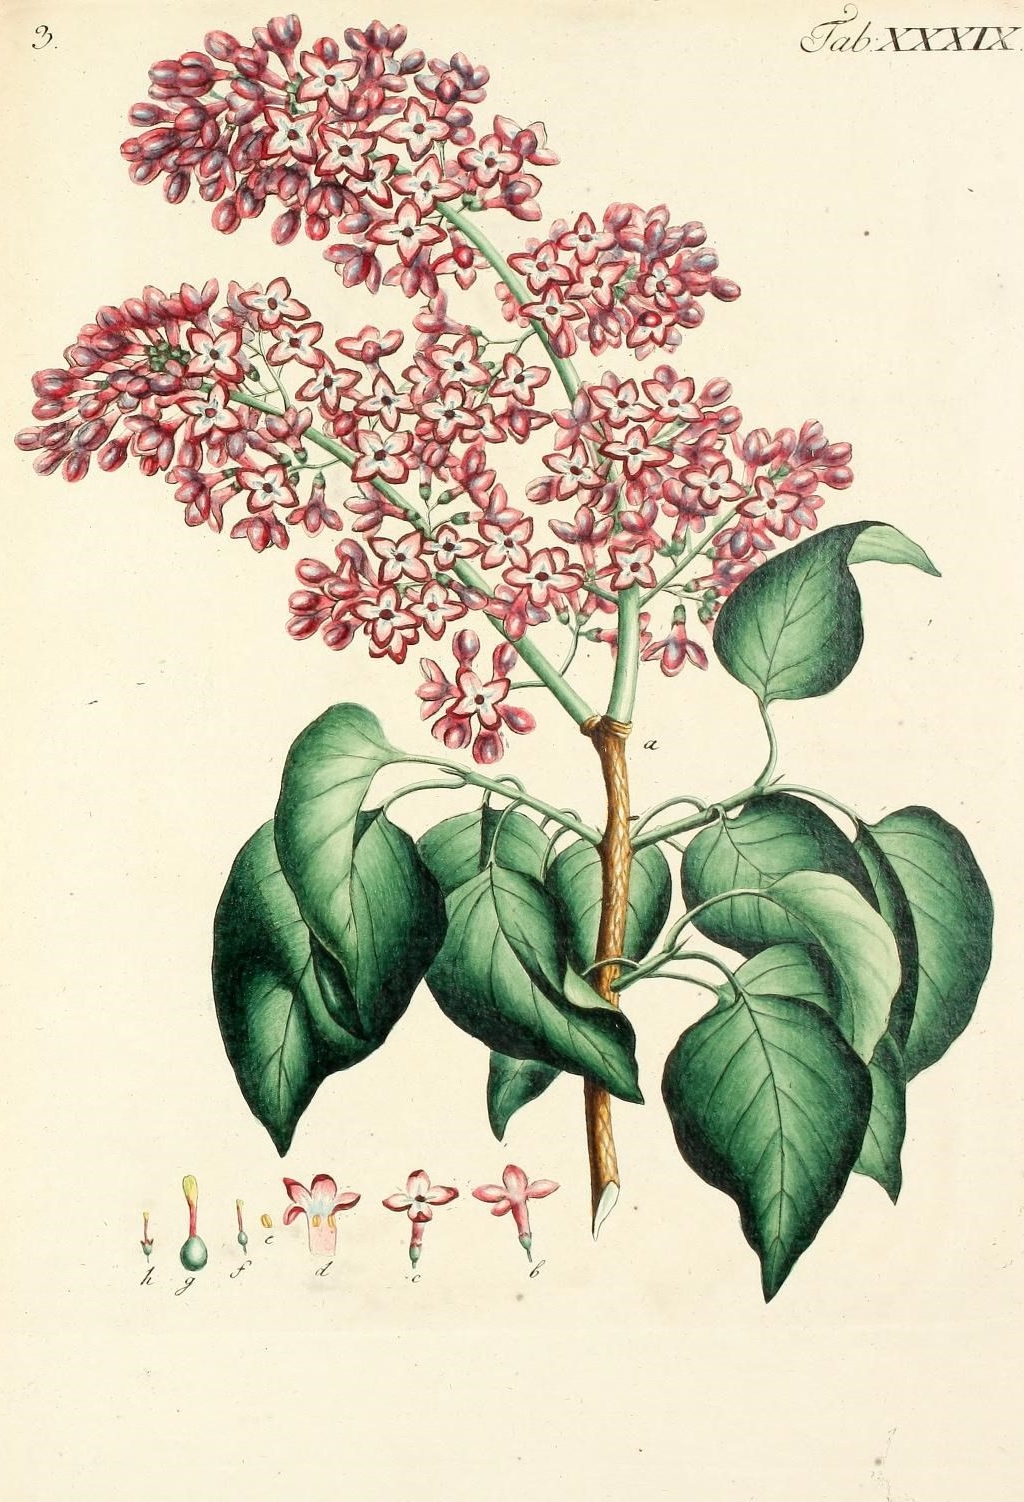 a drawing of a plant with red flowers